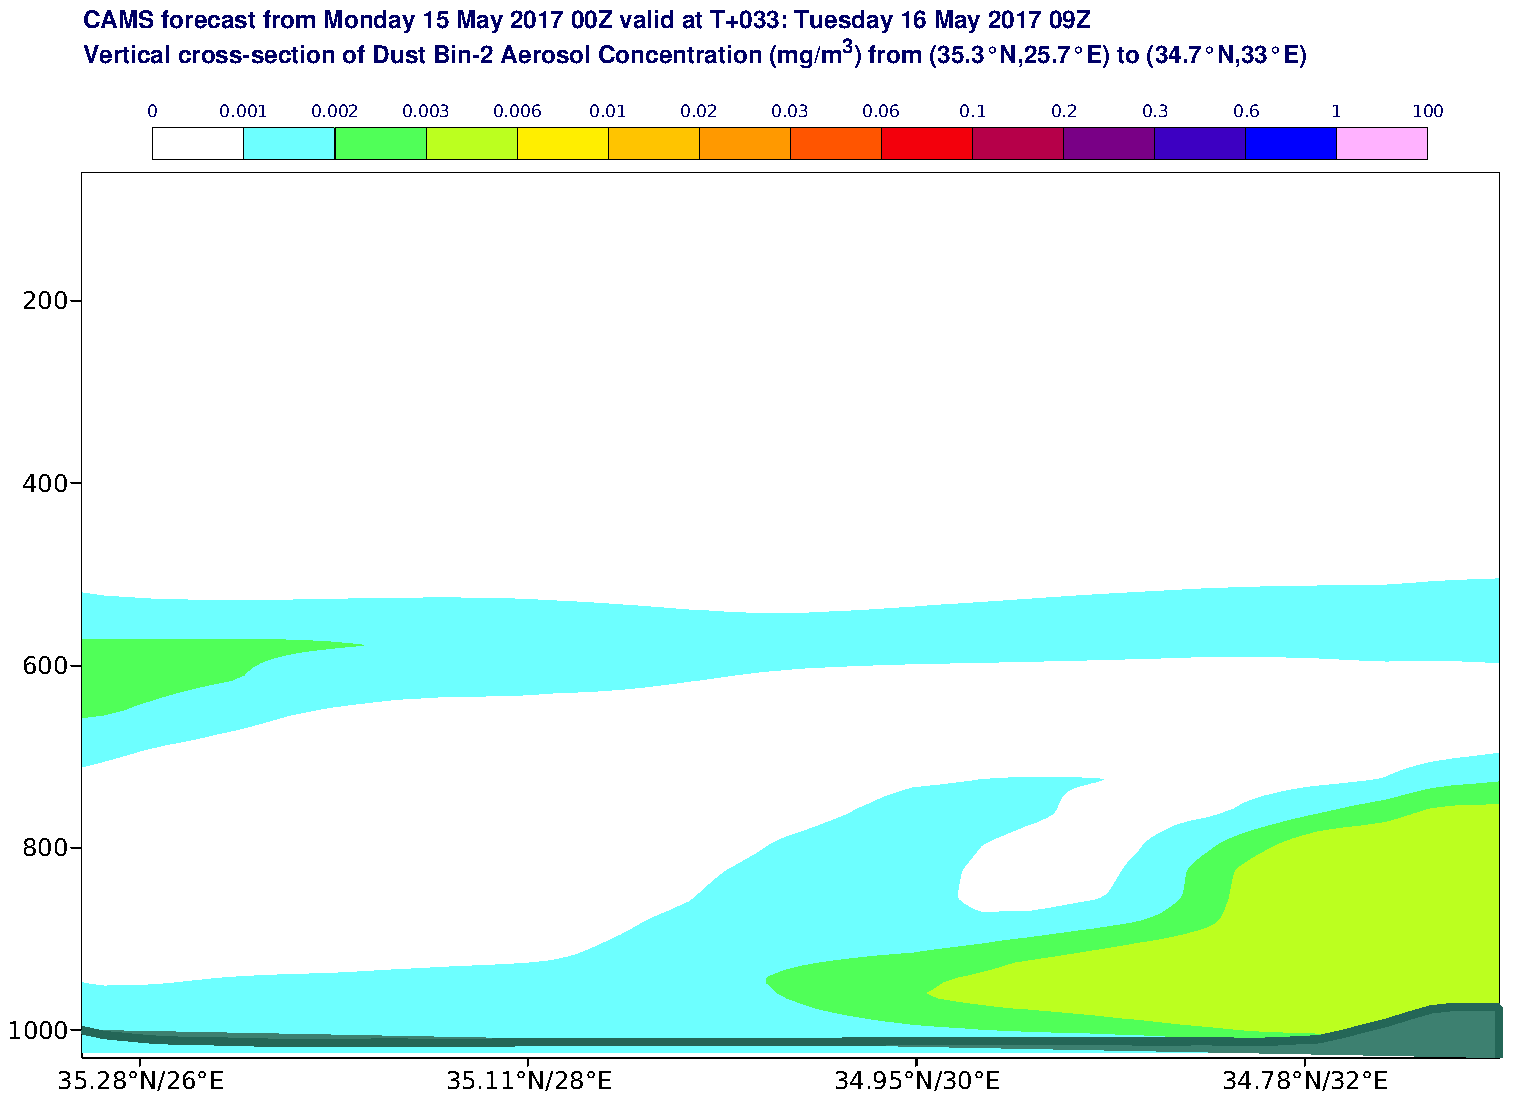 Vertical cross-section of Dust Bin-2 Aerosol Concentration (mg/m3) valid at T33 - 2017-05-16 09:00